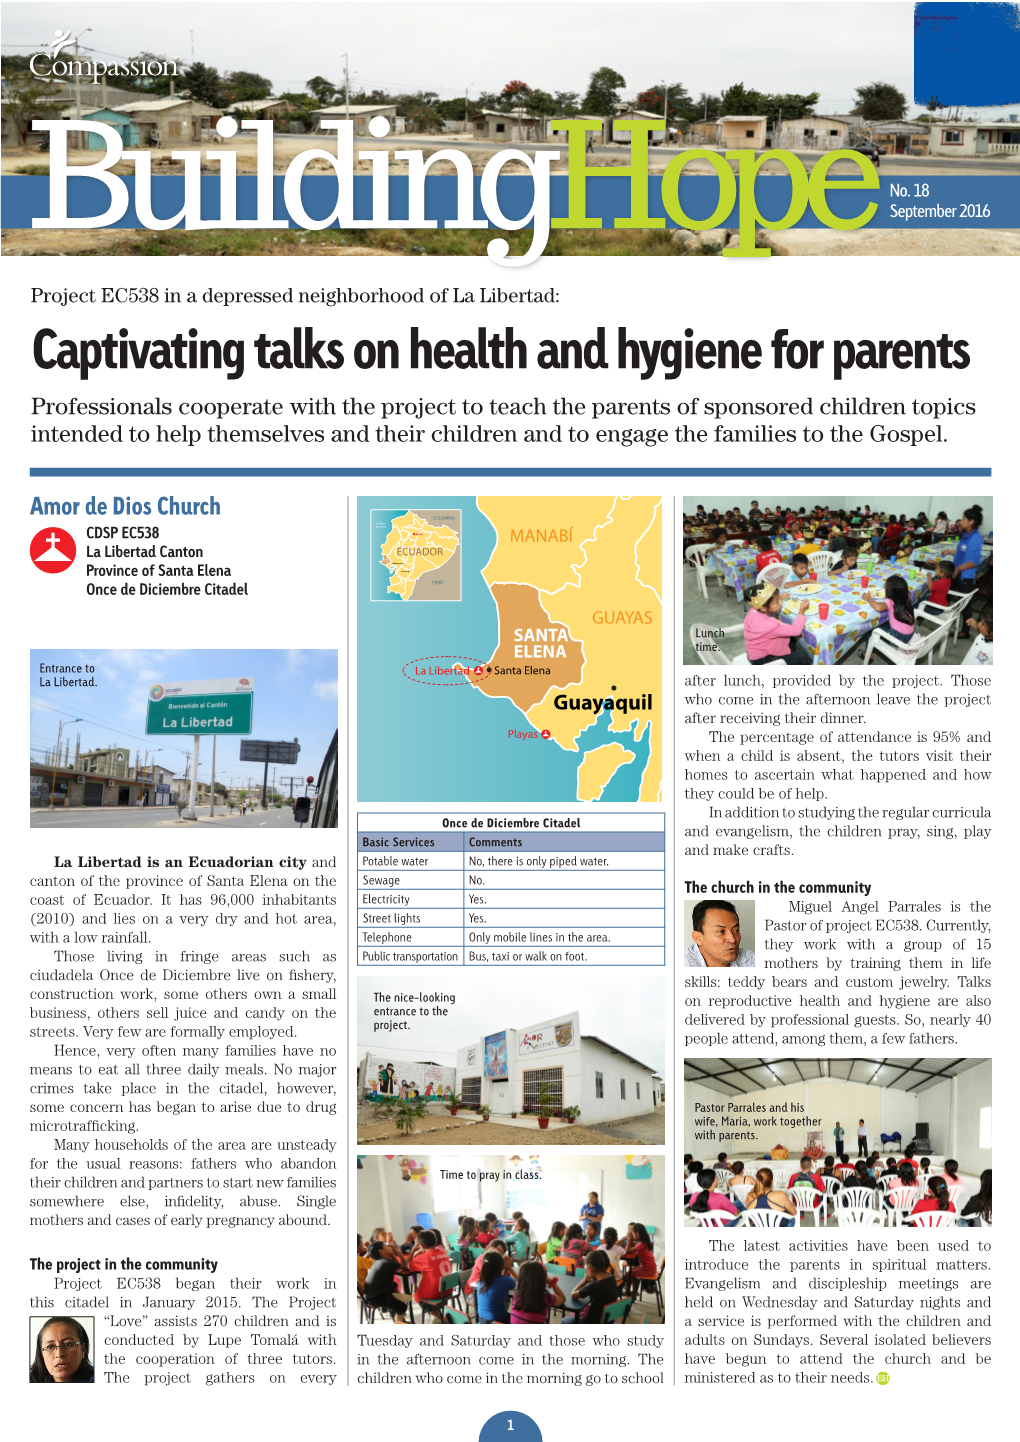 Captivating Talks on Health and Hygiene for Parents